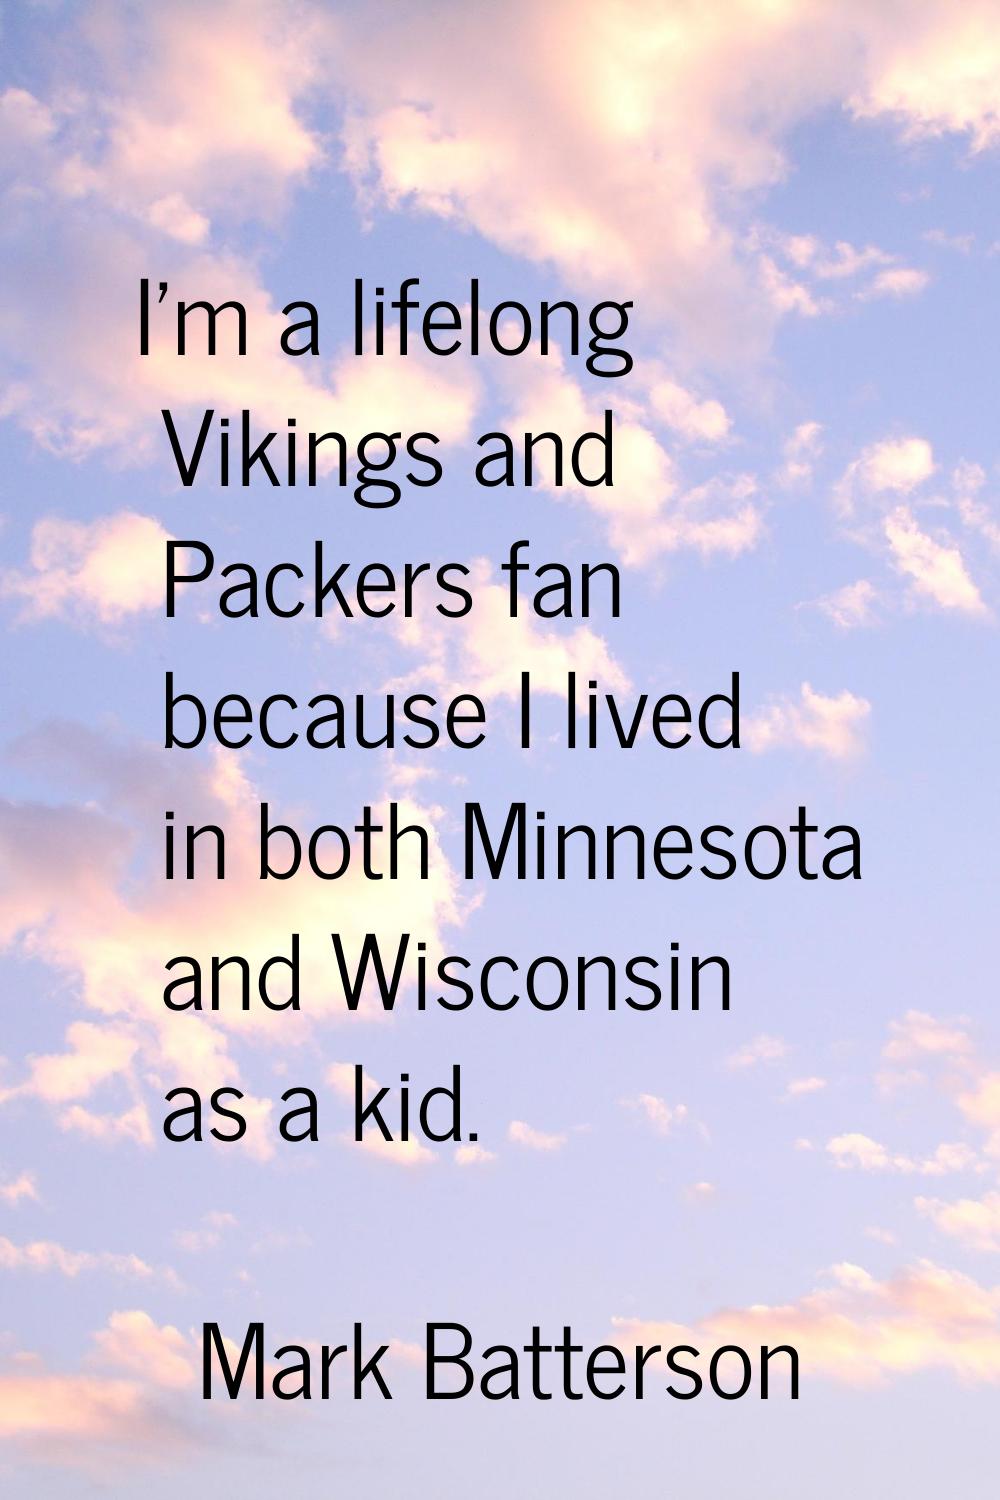 I'm a lifelong Vikings and Packers fan because I lived in both Minnesota and Wisconsin as a kid.